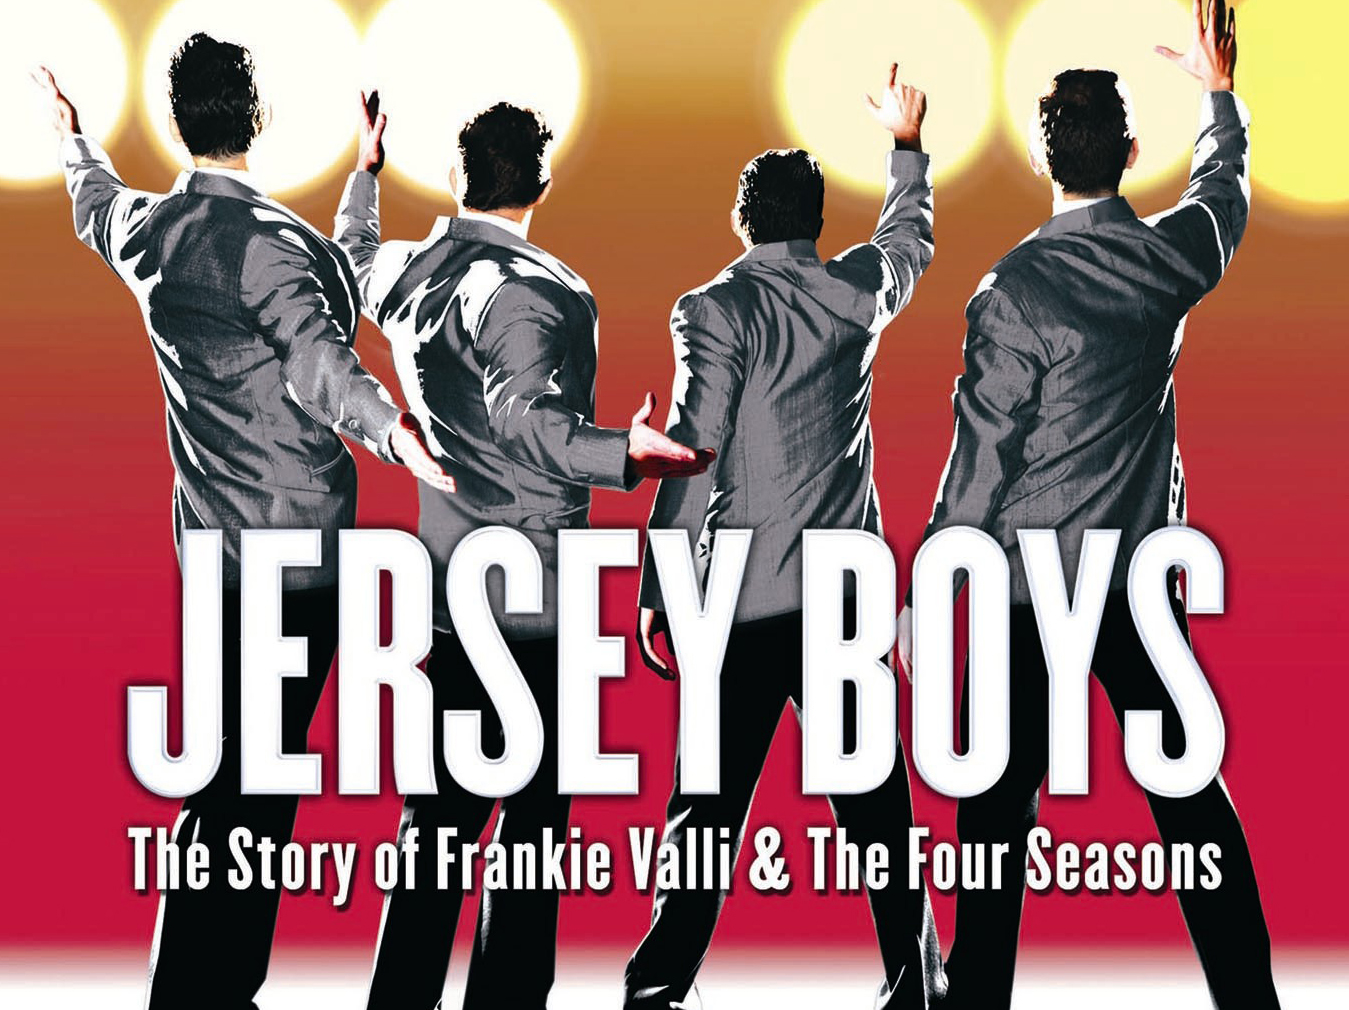 music by the jersey boys